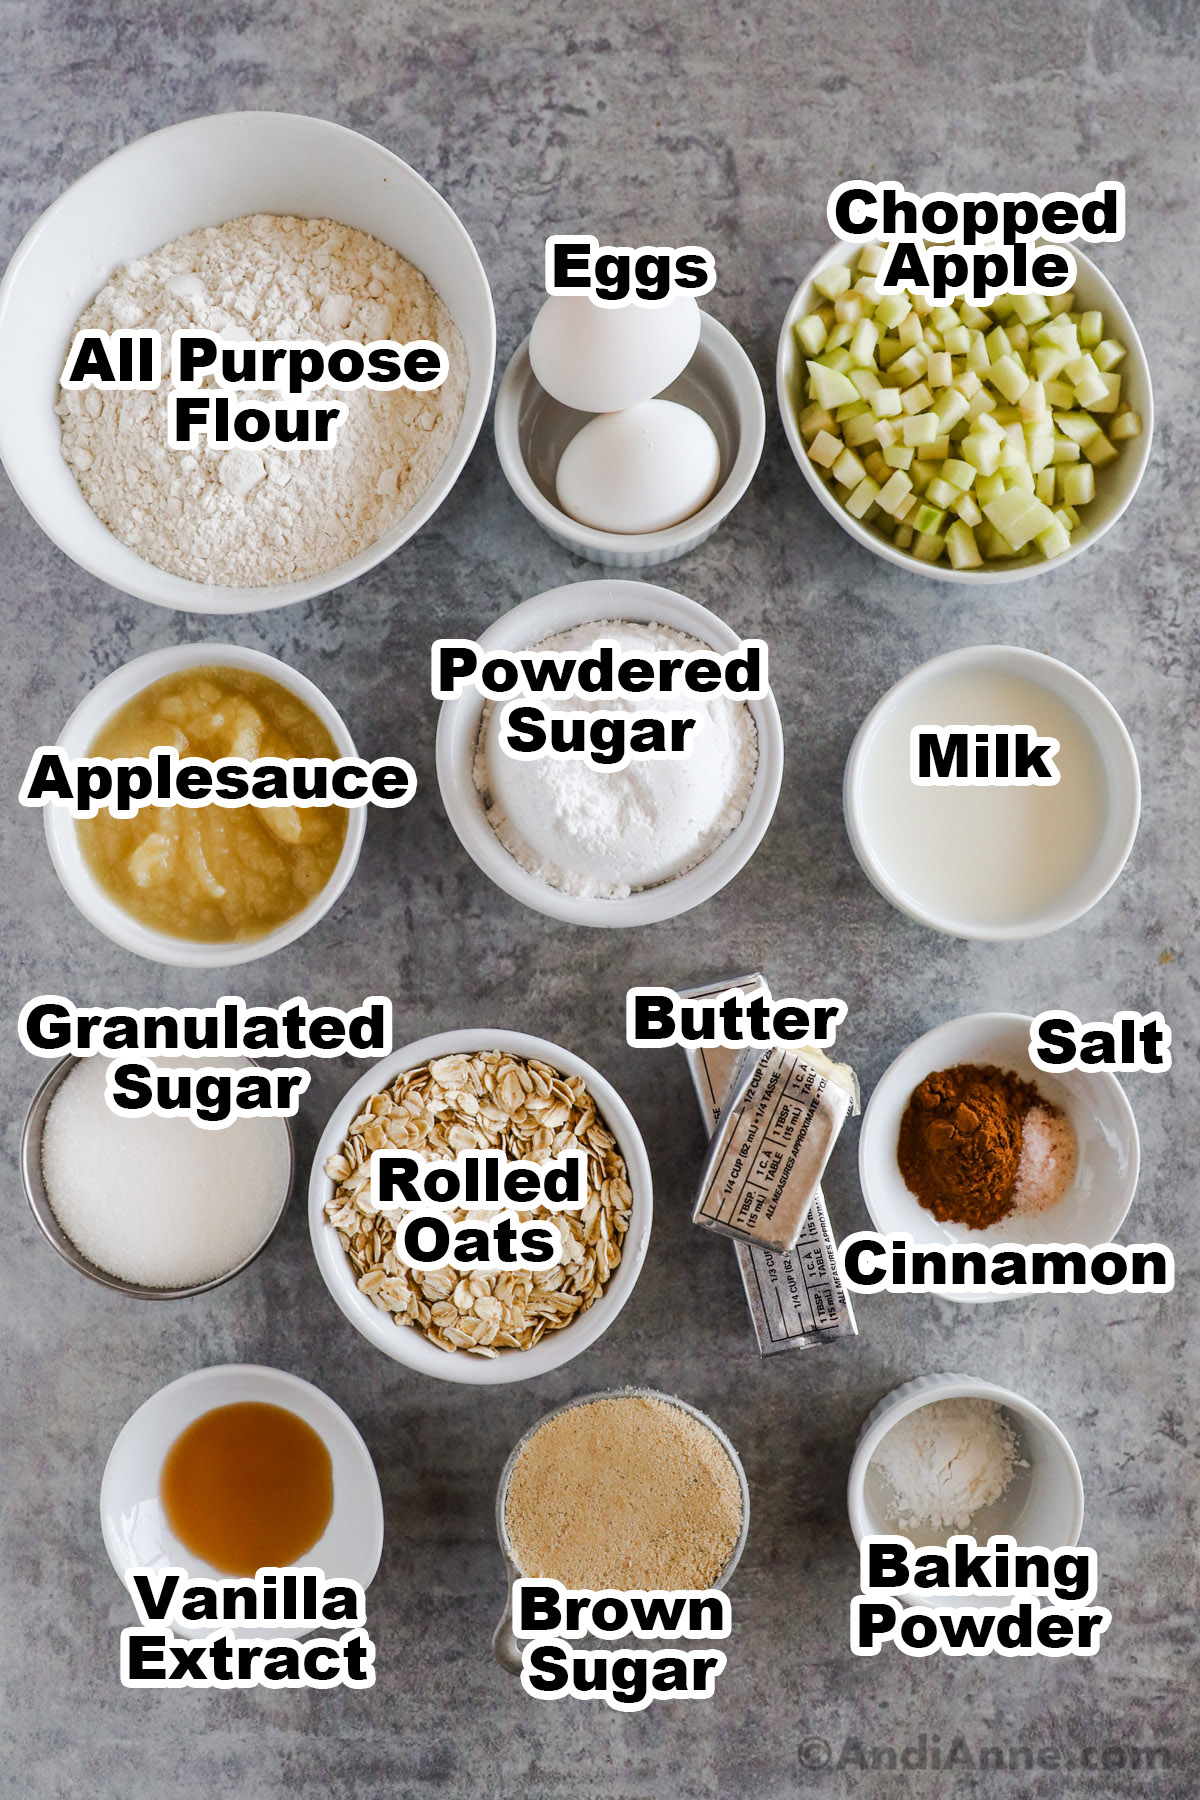 Overhead image of ingredients in separate bowls. All purpose flour, eggs, chopped apple, applesauce, powdered sugar, milk, granulated sugar, rolled oats, butter, salt, cinnamon, vanilla extract, brown sugar and baking powder.
